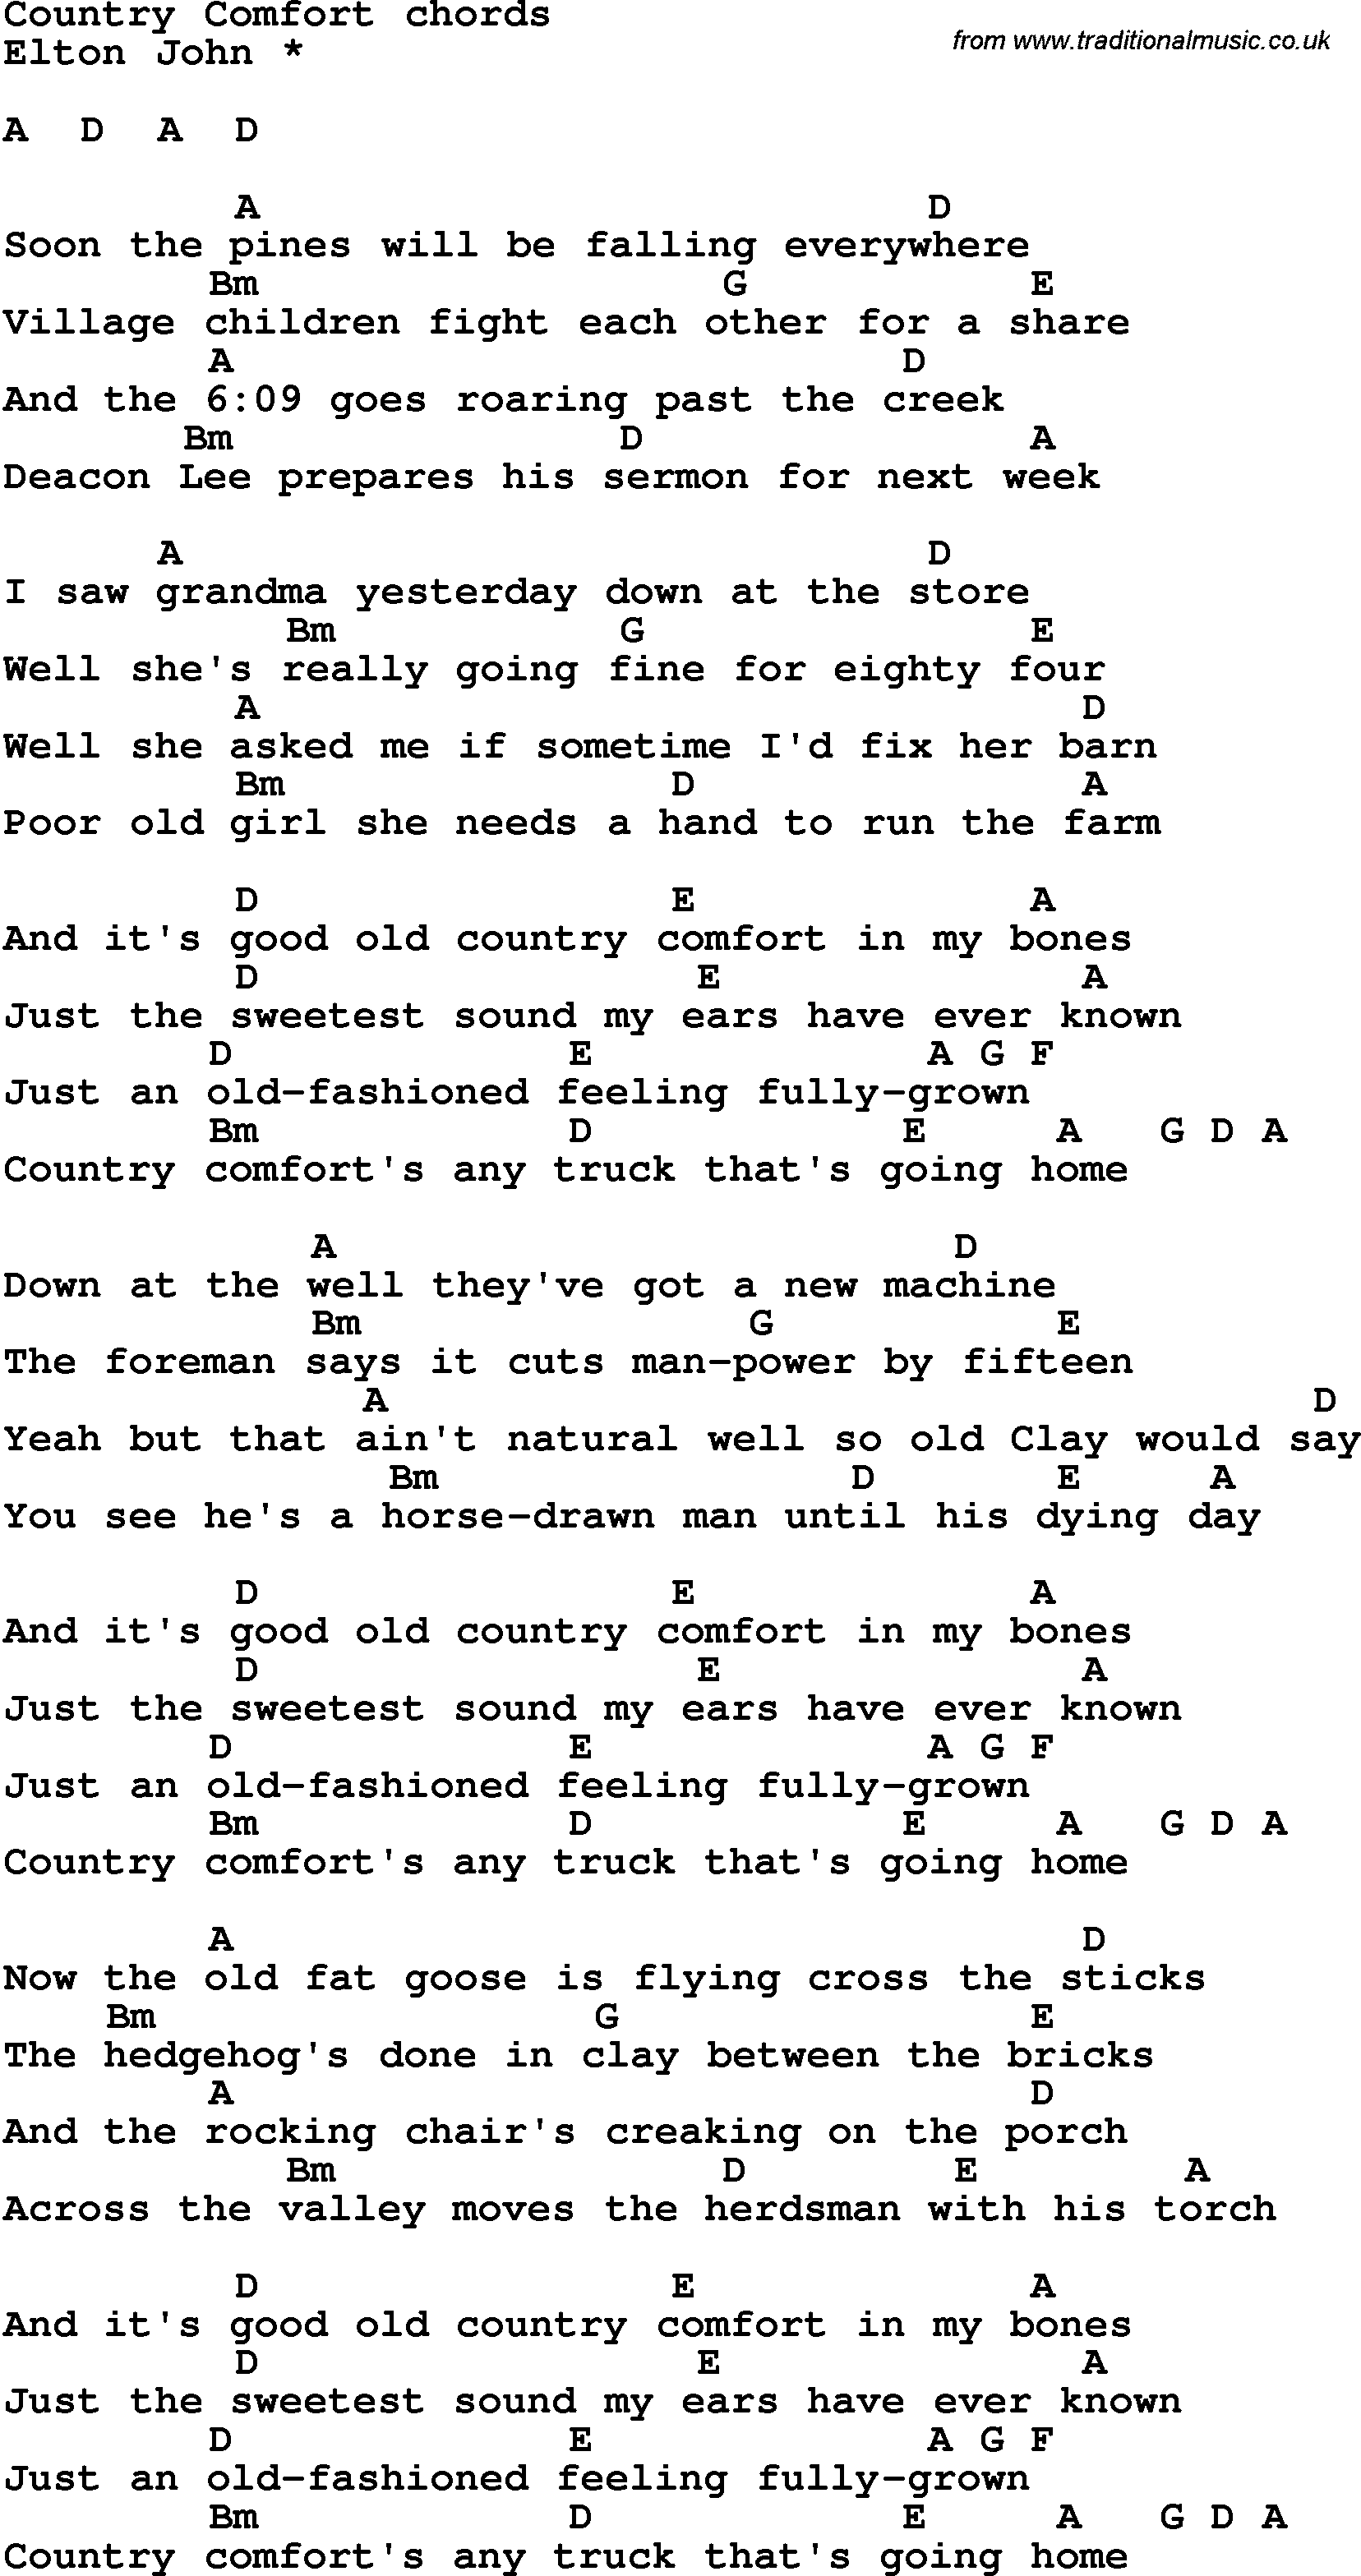 Song Lyrics with guitar chords for Country Comfort